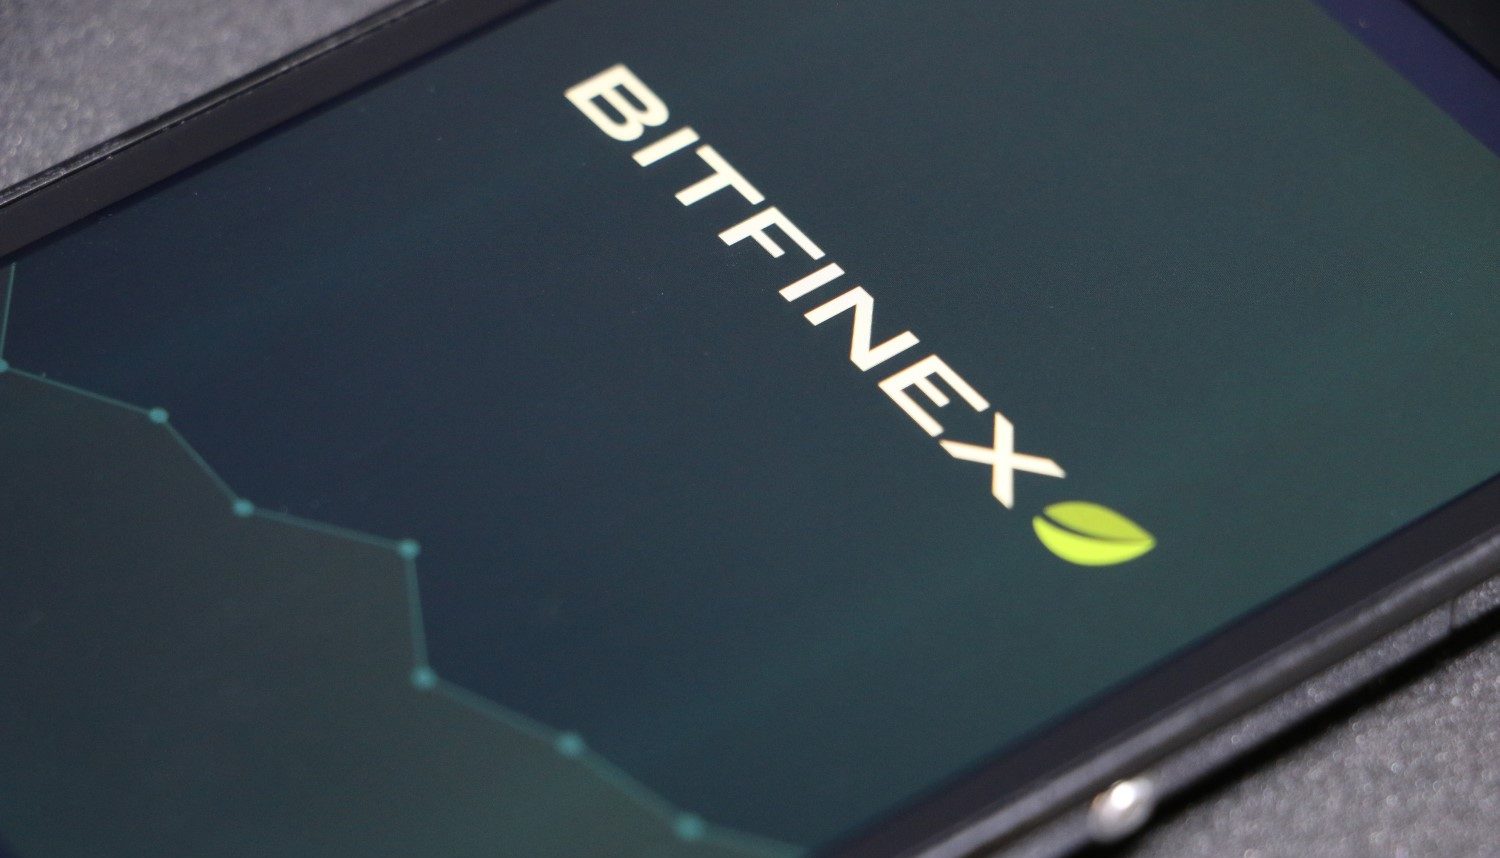 NYAG Pushes Back On Bitfinex’s Claim That State’s Investigation Is Burdensome